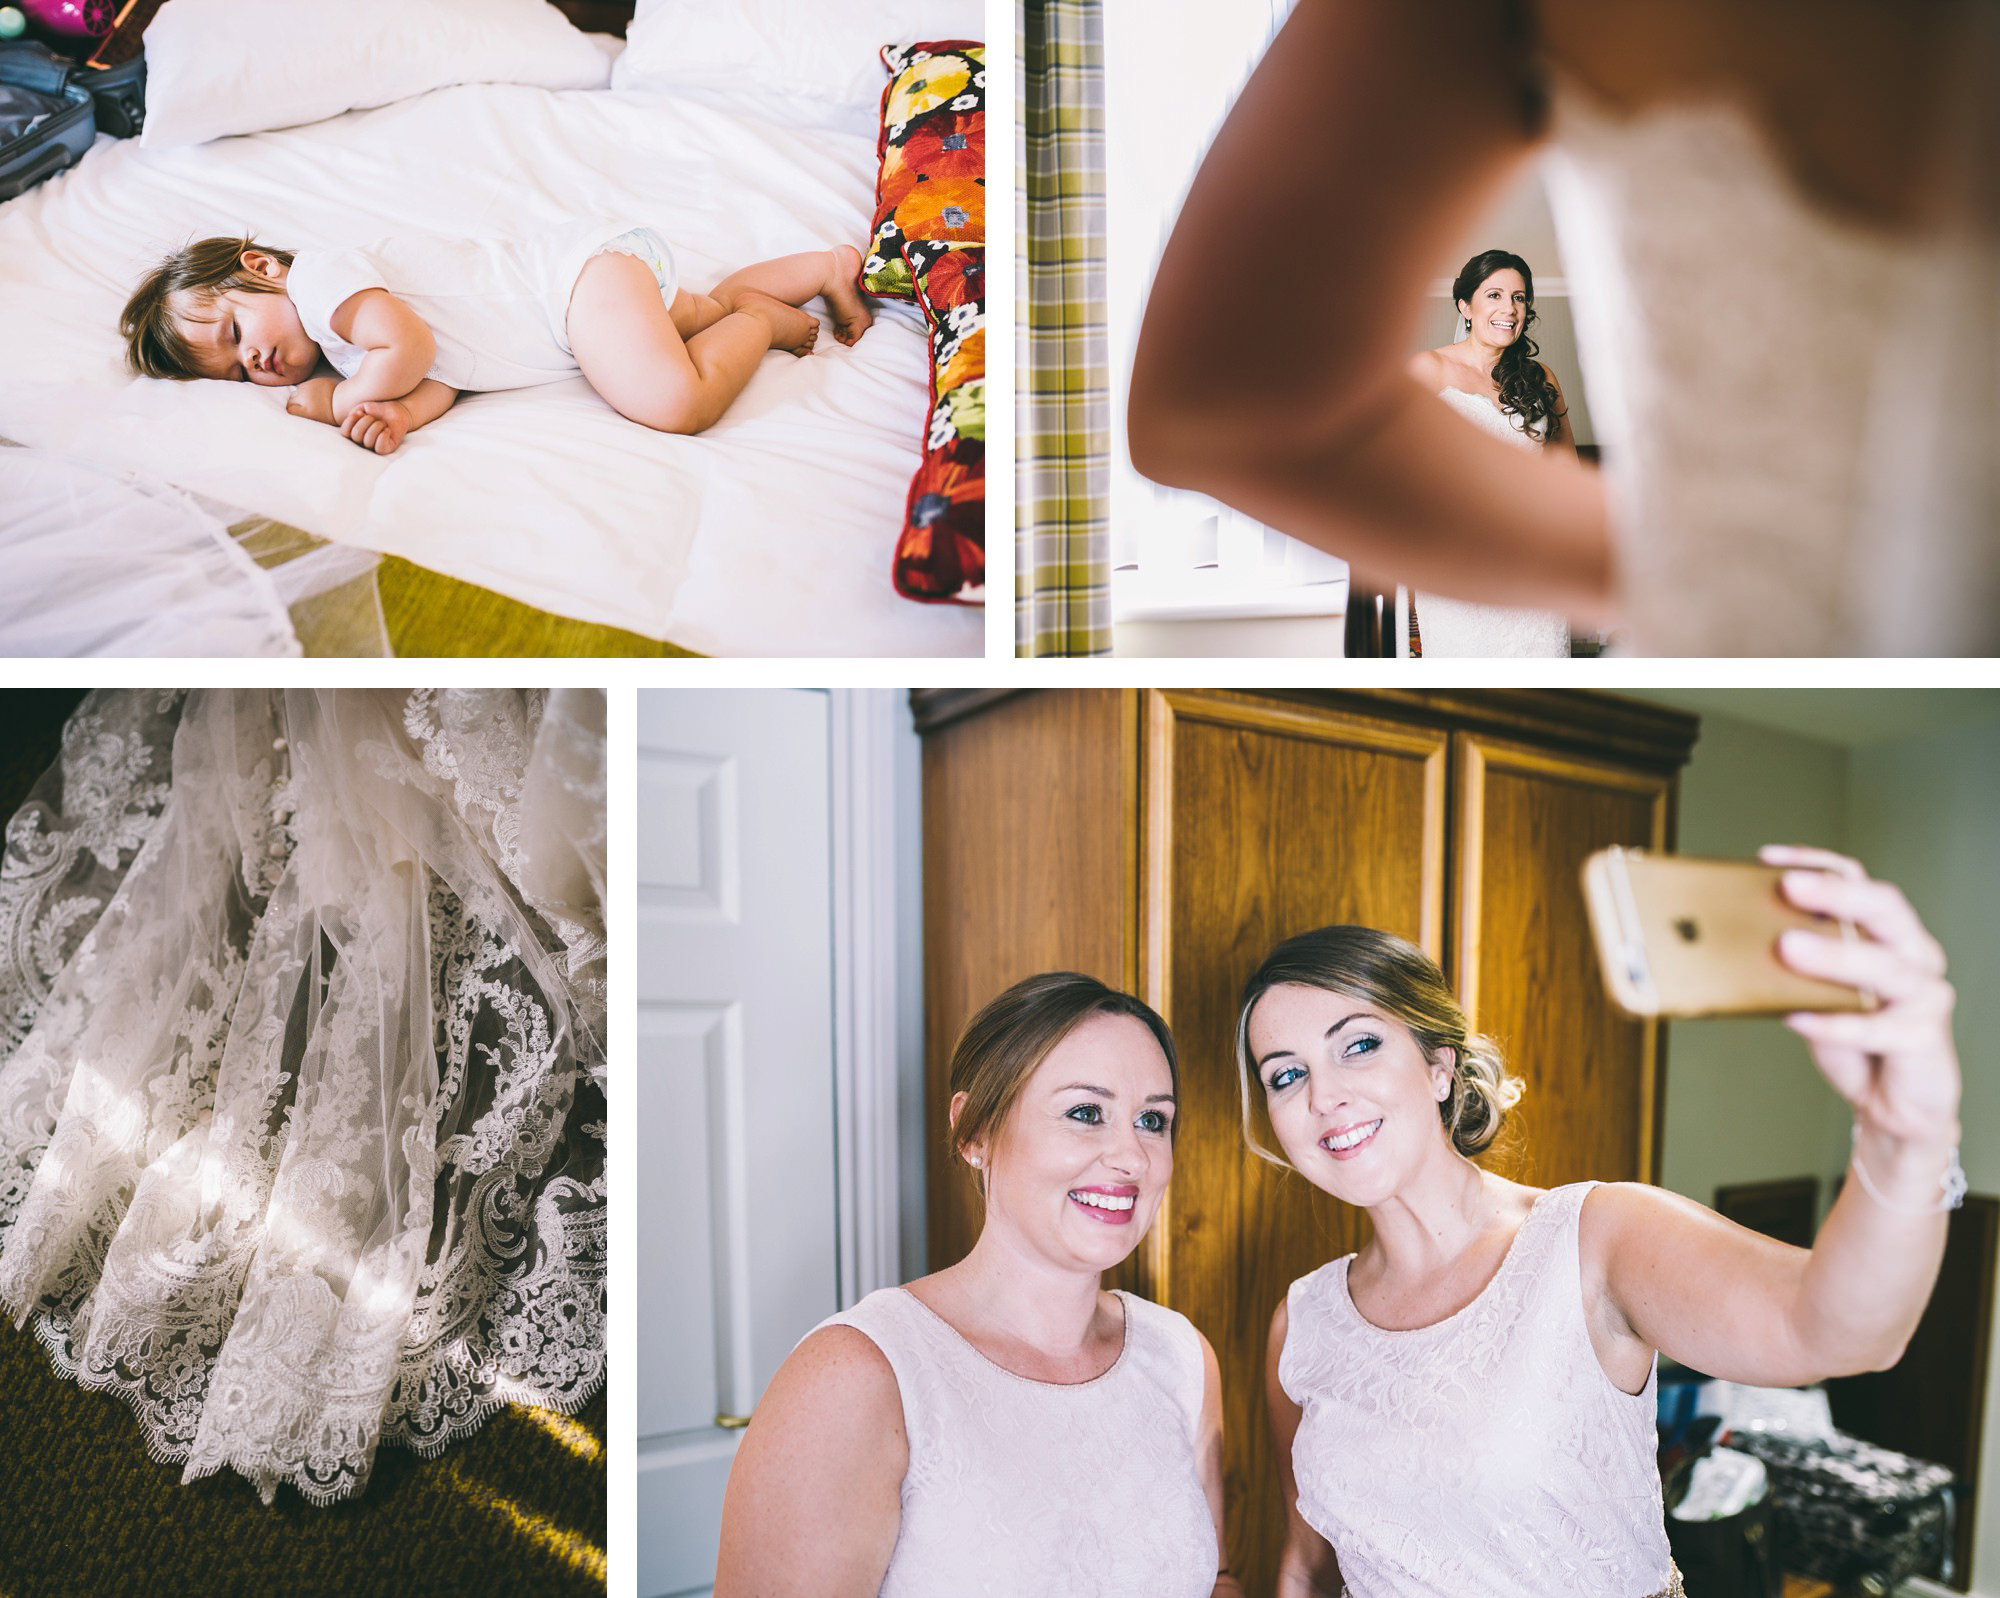 dunston-hall-wedding-in-norwich-james-powell-photography-006